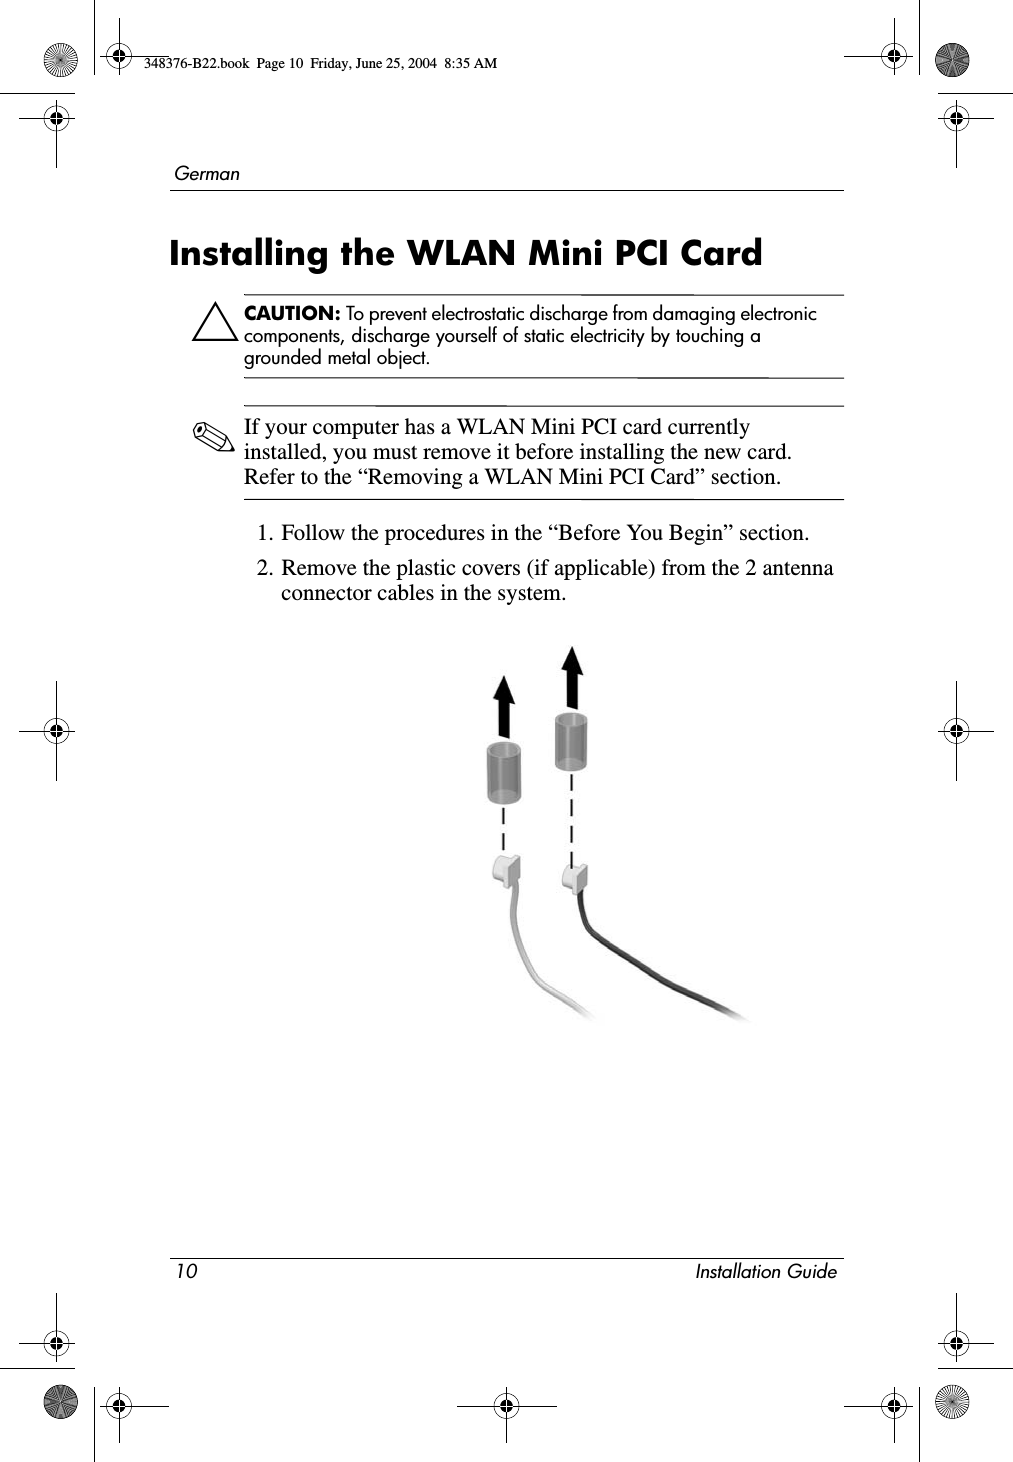 10 Installation GuideGermanInstalling the WLAN Mini PCI CardÄCAUTION: To prevent electrostatic discharge from damaging electronic components, discharge yourself of static electricity by touching a grounded metal object.✎If your computer has a WLAN Mini PCI card currently installed, you must remove it before installing the new card. Refer to the “Removing a WLAN Mini PCI Card” section.1. Follow the procedures in the “Before You Begin” section.2. Remove the plastic covers (if applicable) from the 2 antenna connector cables in the system.348376-B22.book  Page 10  Friday, June 25, 2004  8:35 AM